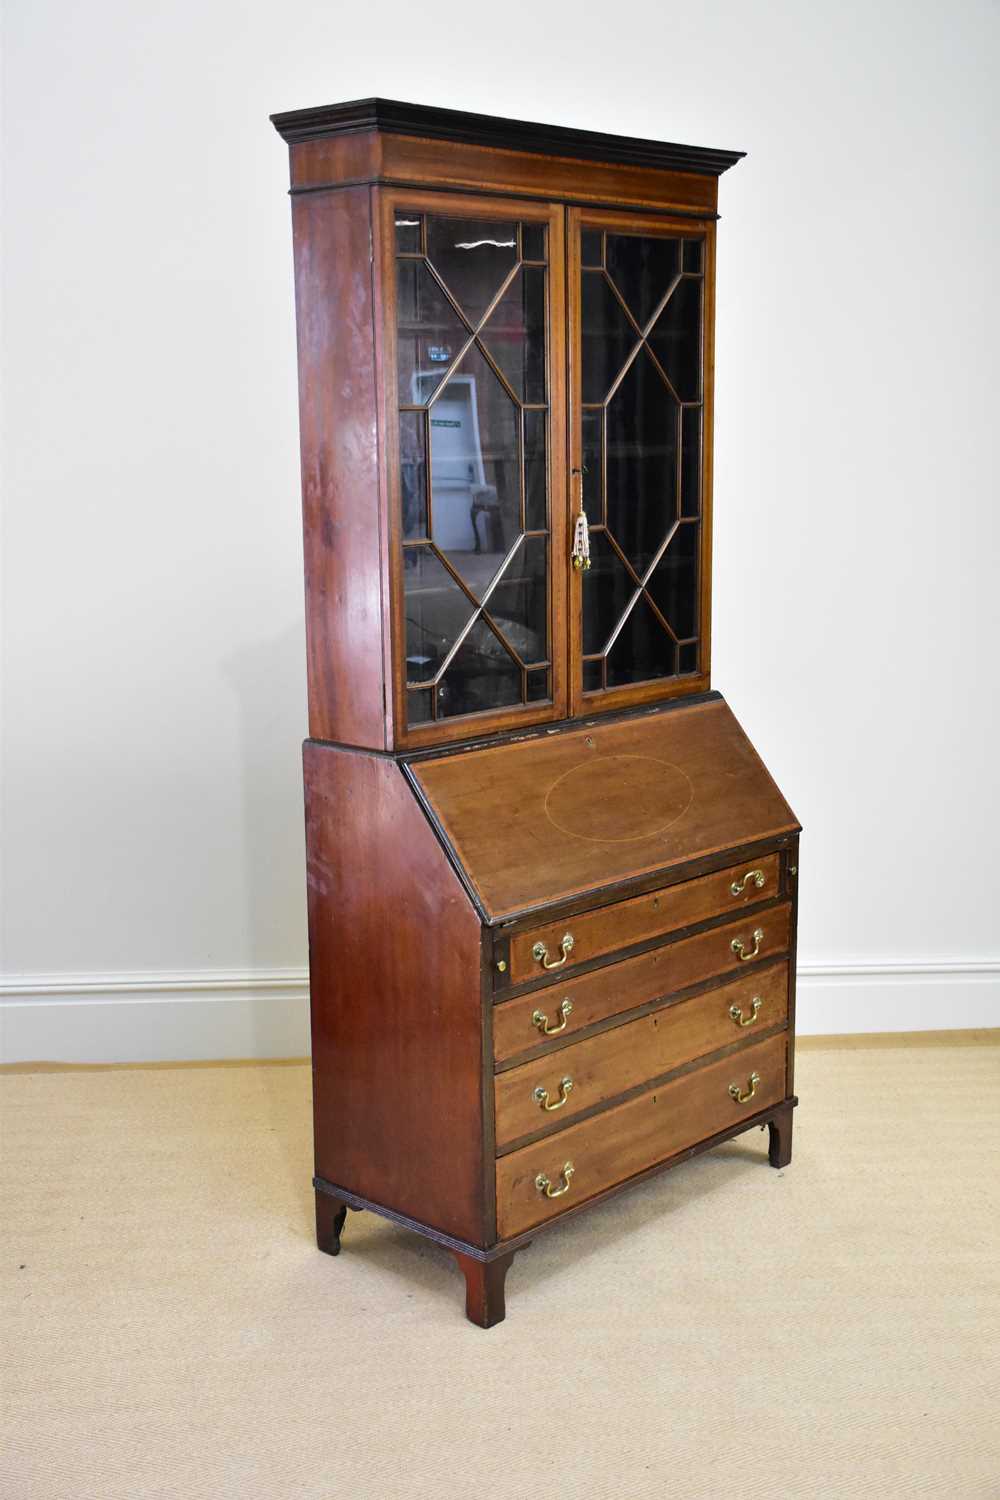 An Edwardian inlaid and crossbanded mahogany bureau bookcase with moulded cornice above a pair of